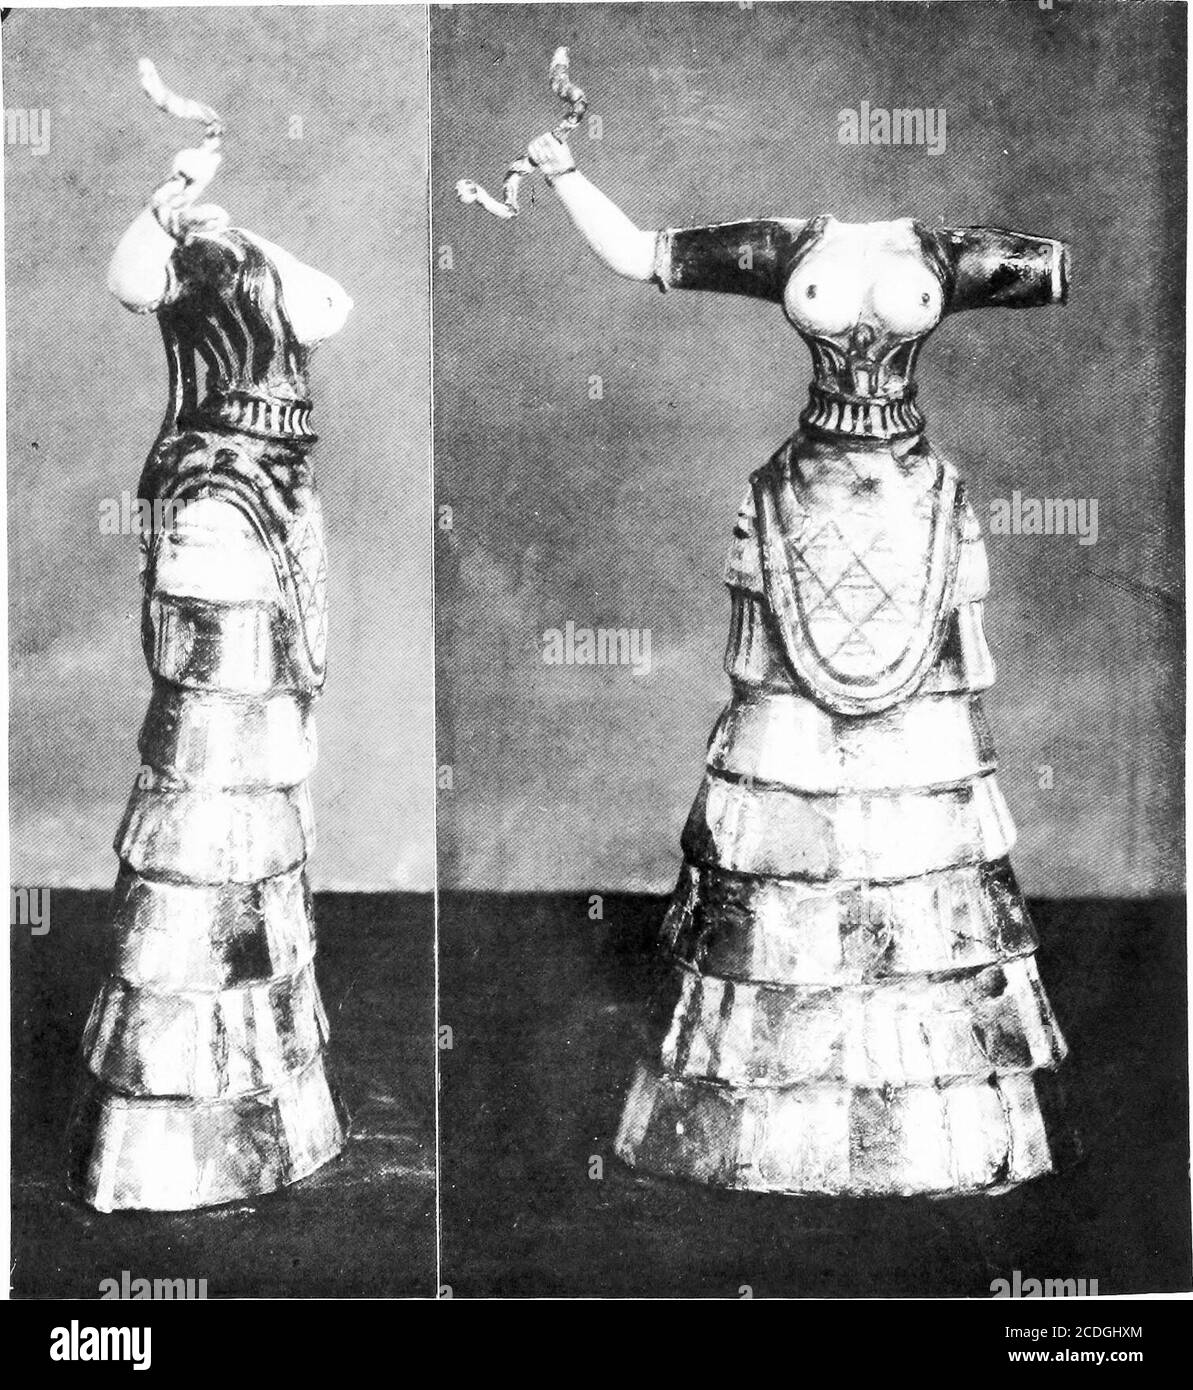 . The palace of Minos : a comparative account of the successive stages of the early Cretan civilization as illustrated by the discoveries at Knossos . Fig. 359. Back View of FaienceFigure of Snake Goddess, {c. f) 502 THE PALACE OF MINOS, ETC.. Fig. 360, a, b. Faience Figure of Votary (or Double) of Snake Goddess, {c. f) M.M. Ill: THE SNAKE GODDESS AND RELICS 503 position. The skin here is pure white, the bodice a dark orange with purplish-brown bands, and the rest of the dress shows designs of the same purplish-bi-own on a pale -ground. These represe»*atlons, including the back view shown in F Stock Photo